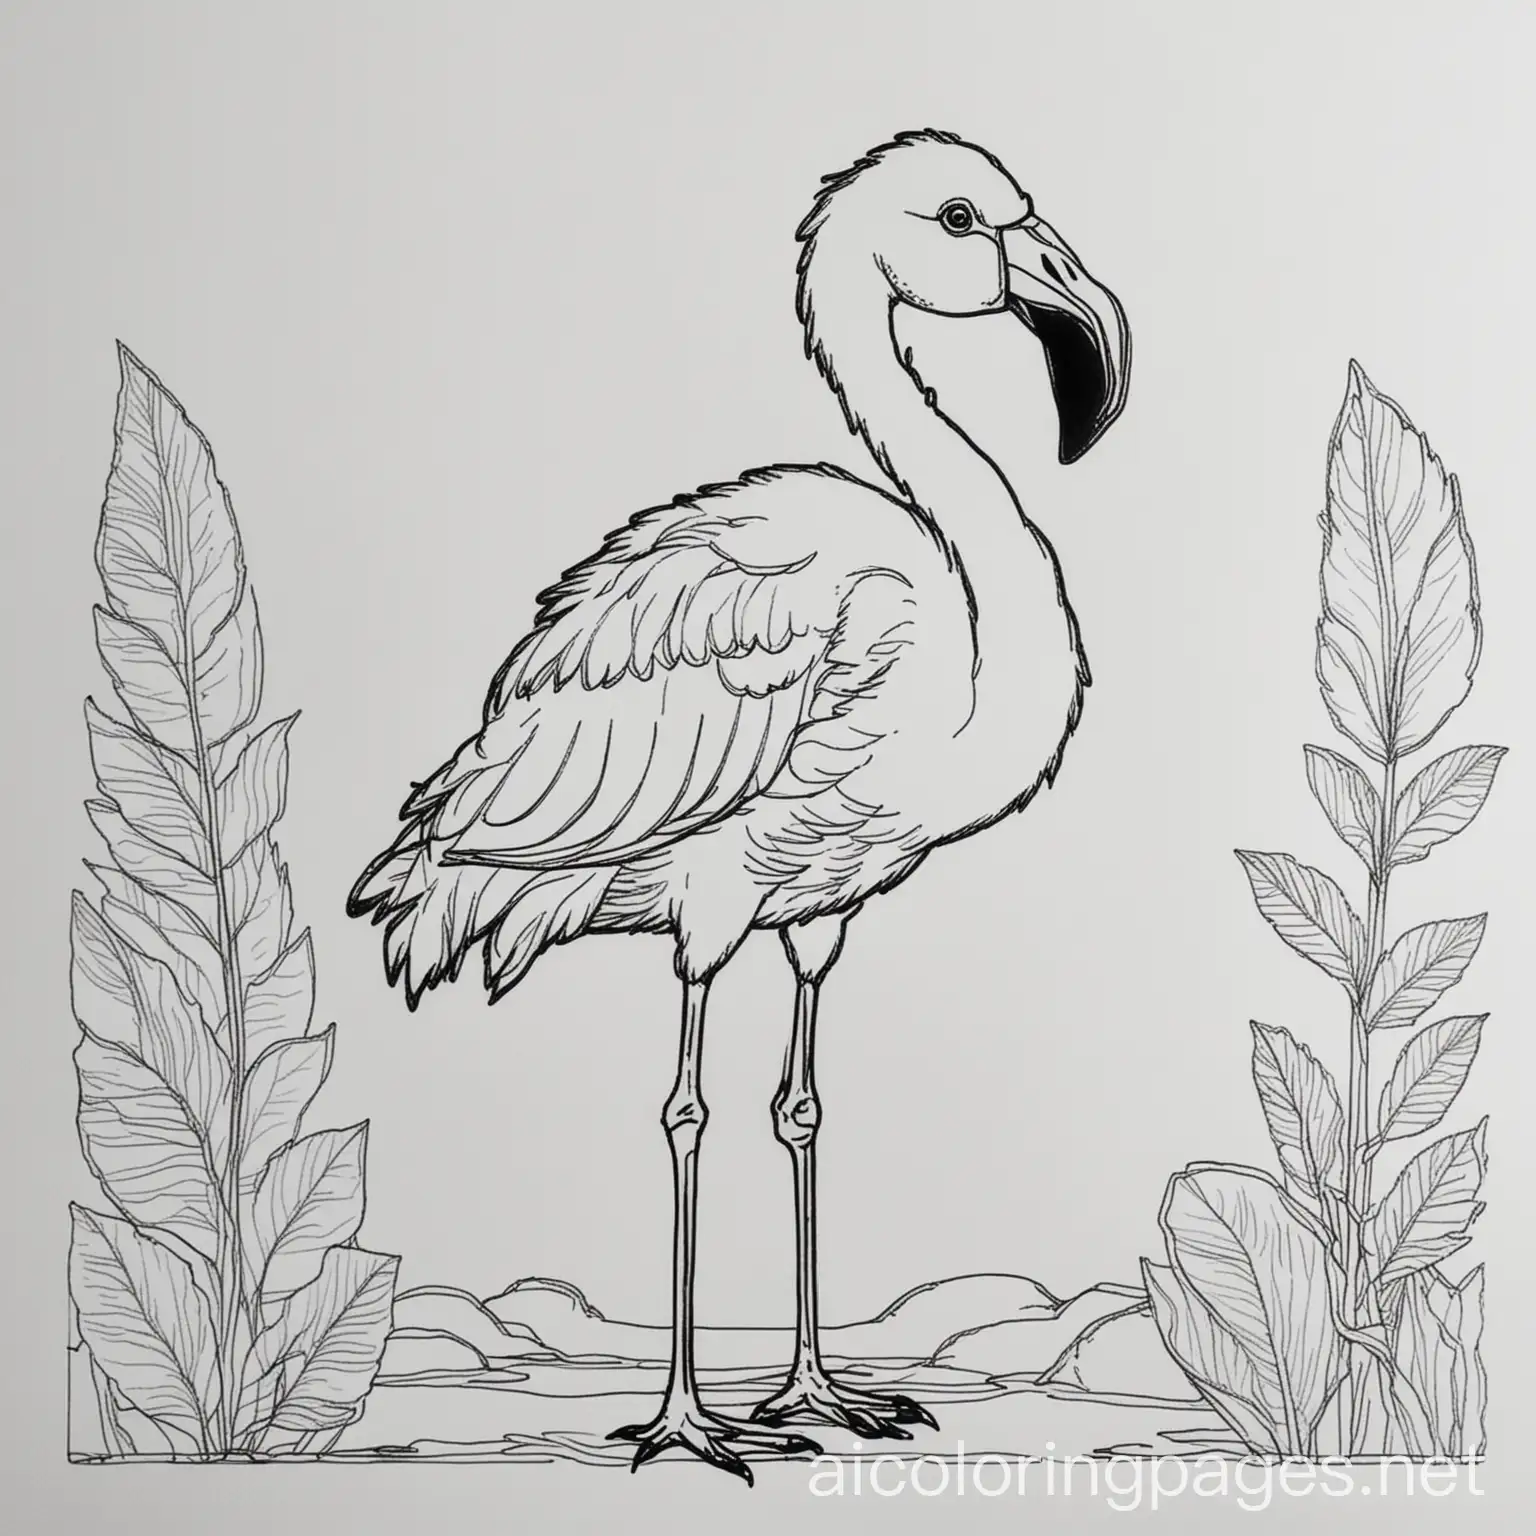 Flamingo-Coloring-Page-for-Kids-Simple-Line-Art-on-White-Background